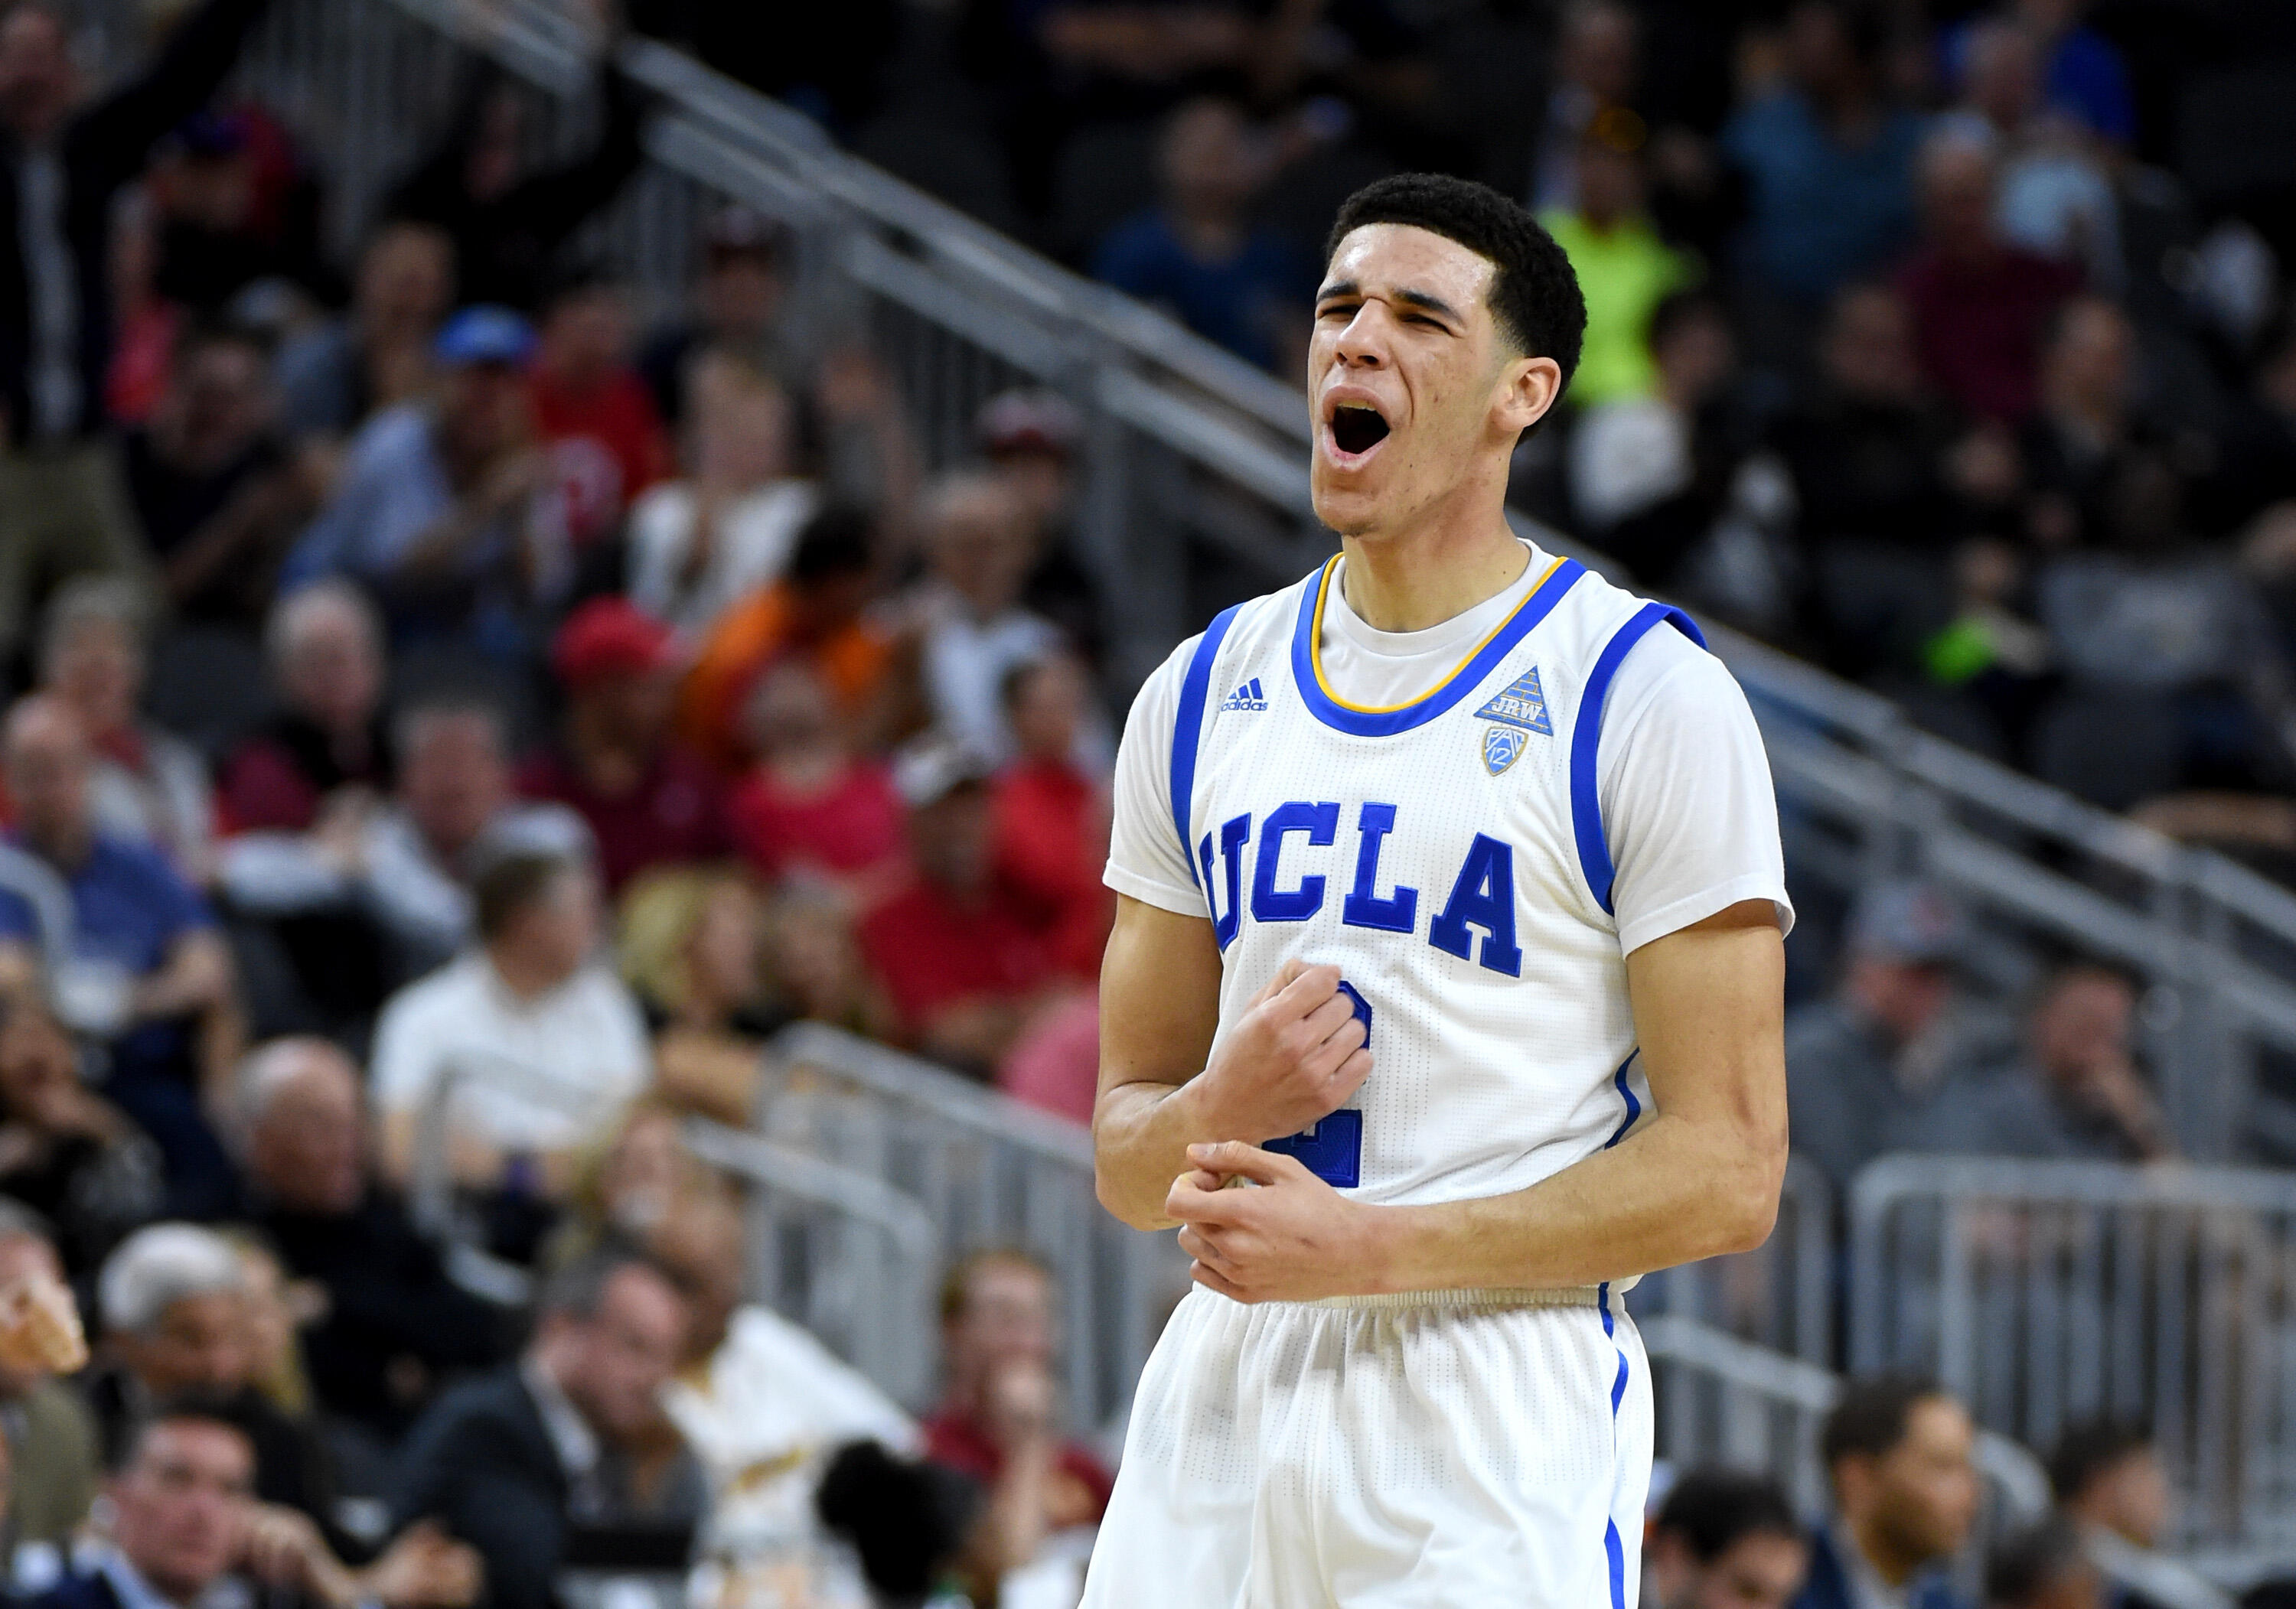 LAS VEGAS, NV - MARCH 09:  Lonzo Ball #2 of the UCLA Bruins celebrates after scoring against the USC Trojans during a quarterfinal game of the Pac-12 Basketball Tournament at T-Mobile Arena on March 9, 2017 in Las Vegas, Nevada. UCLA won 76-74.  (Photo by